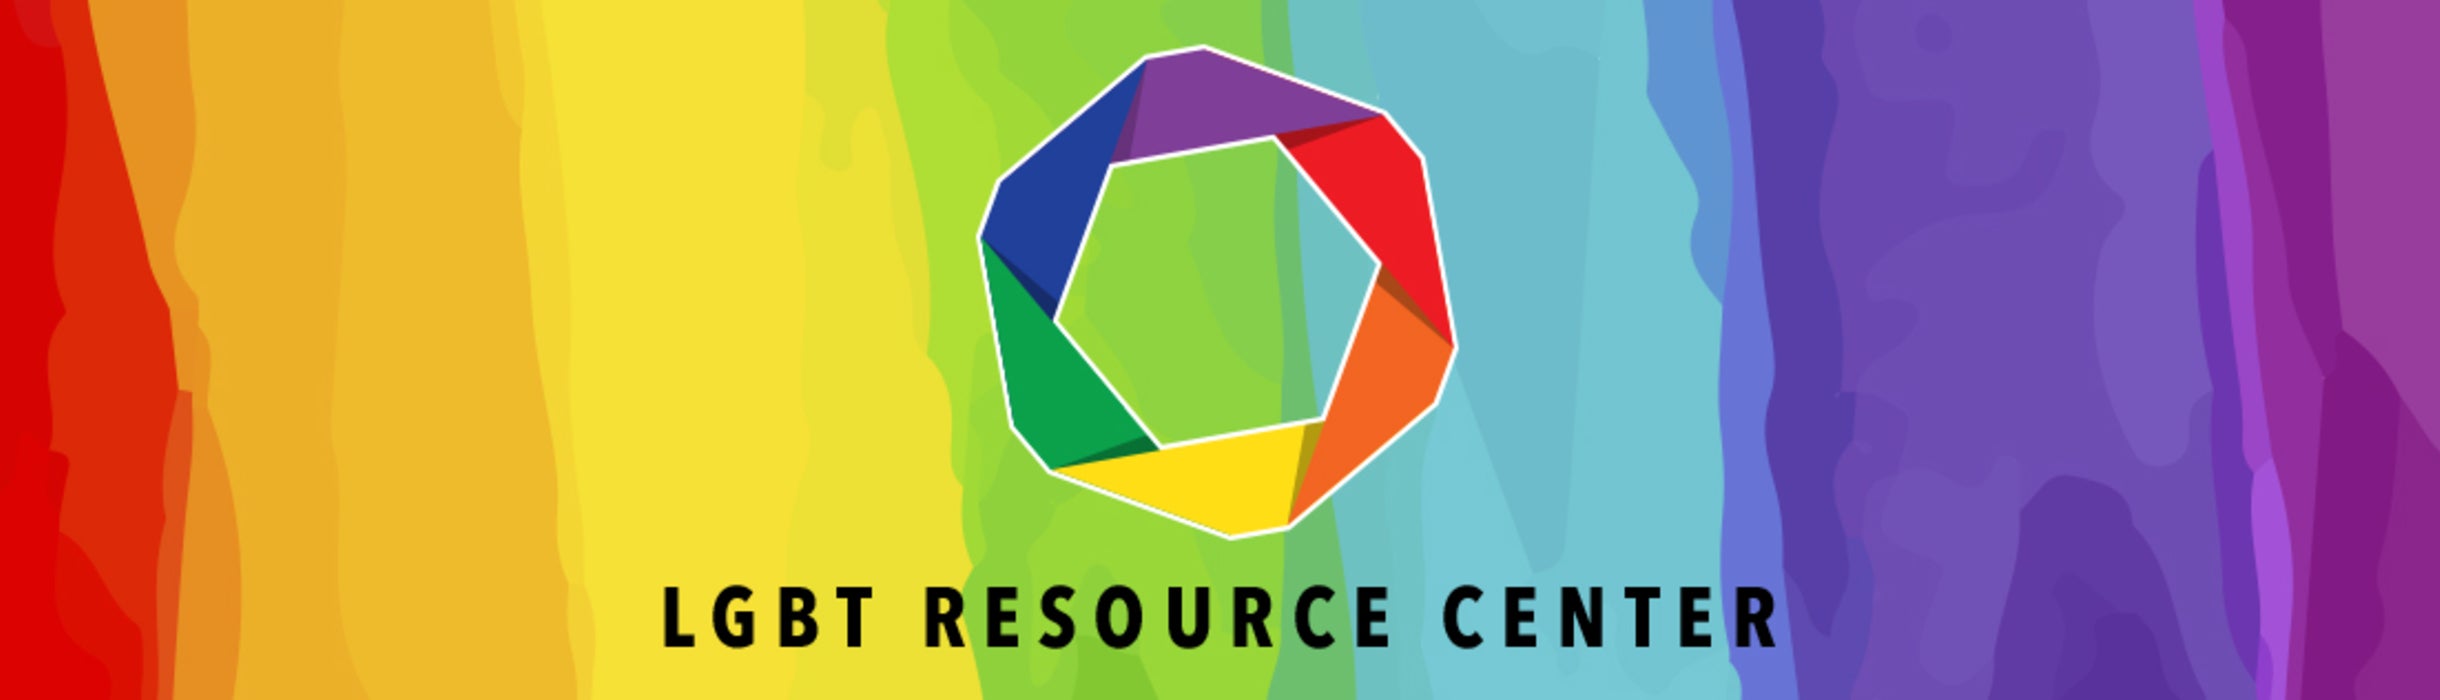 UCR's LGBTRC welcomes the LGBTQIA+ community to explore our services and programs.